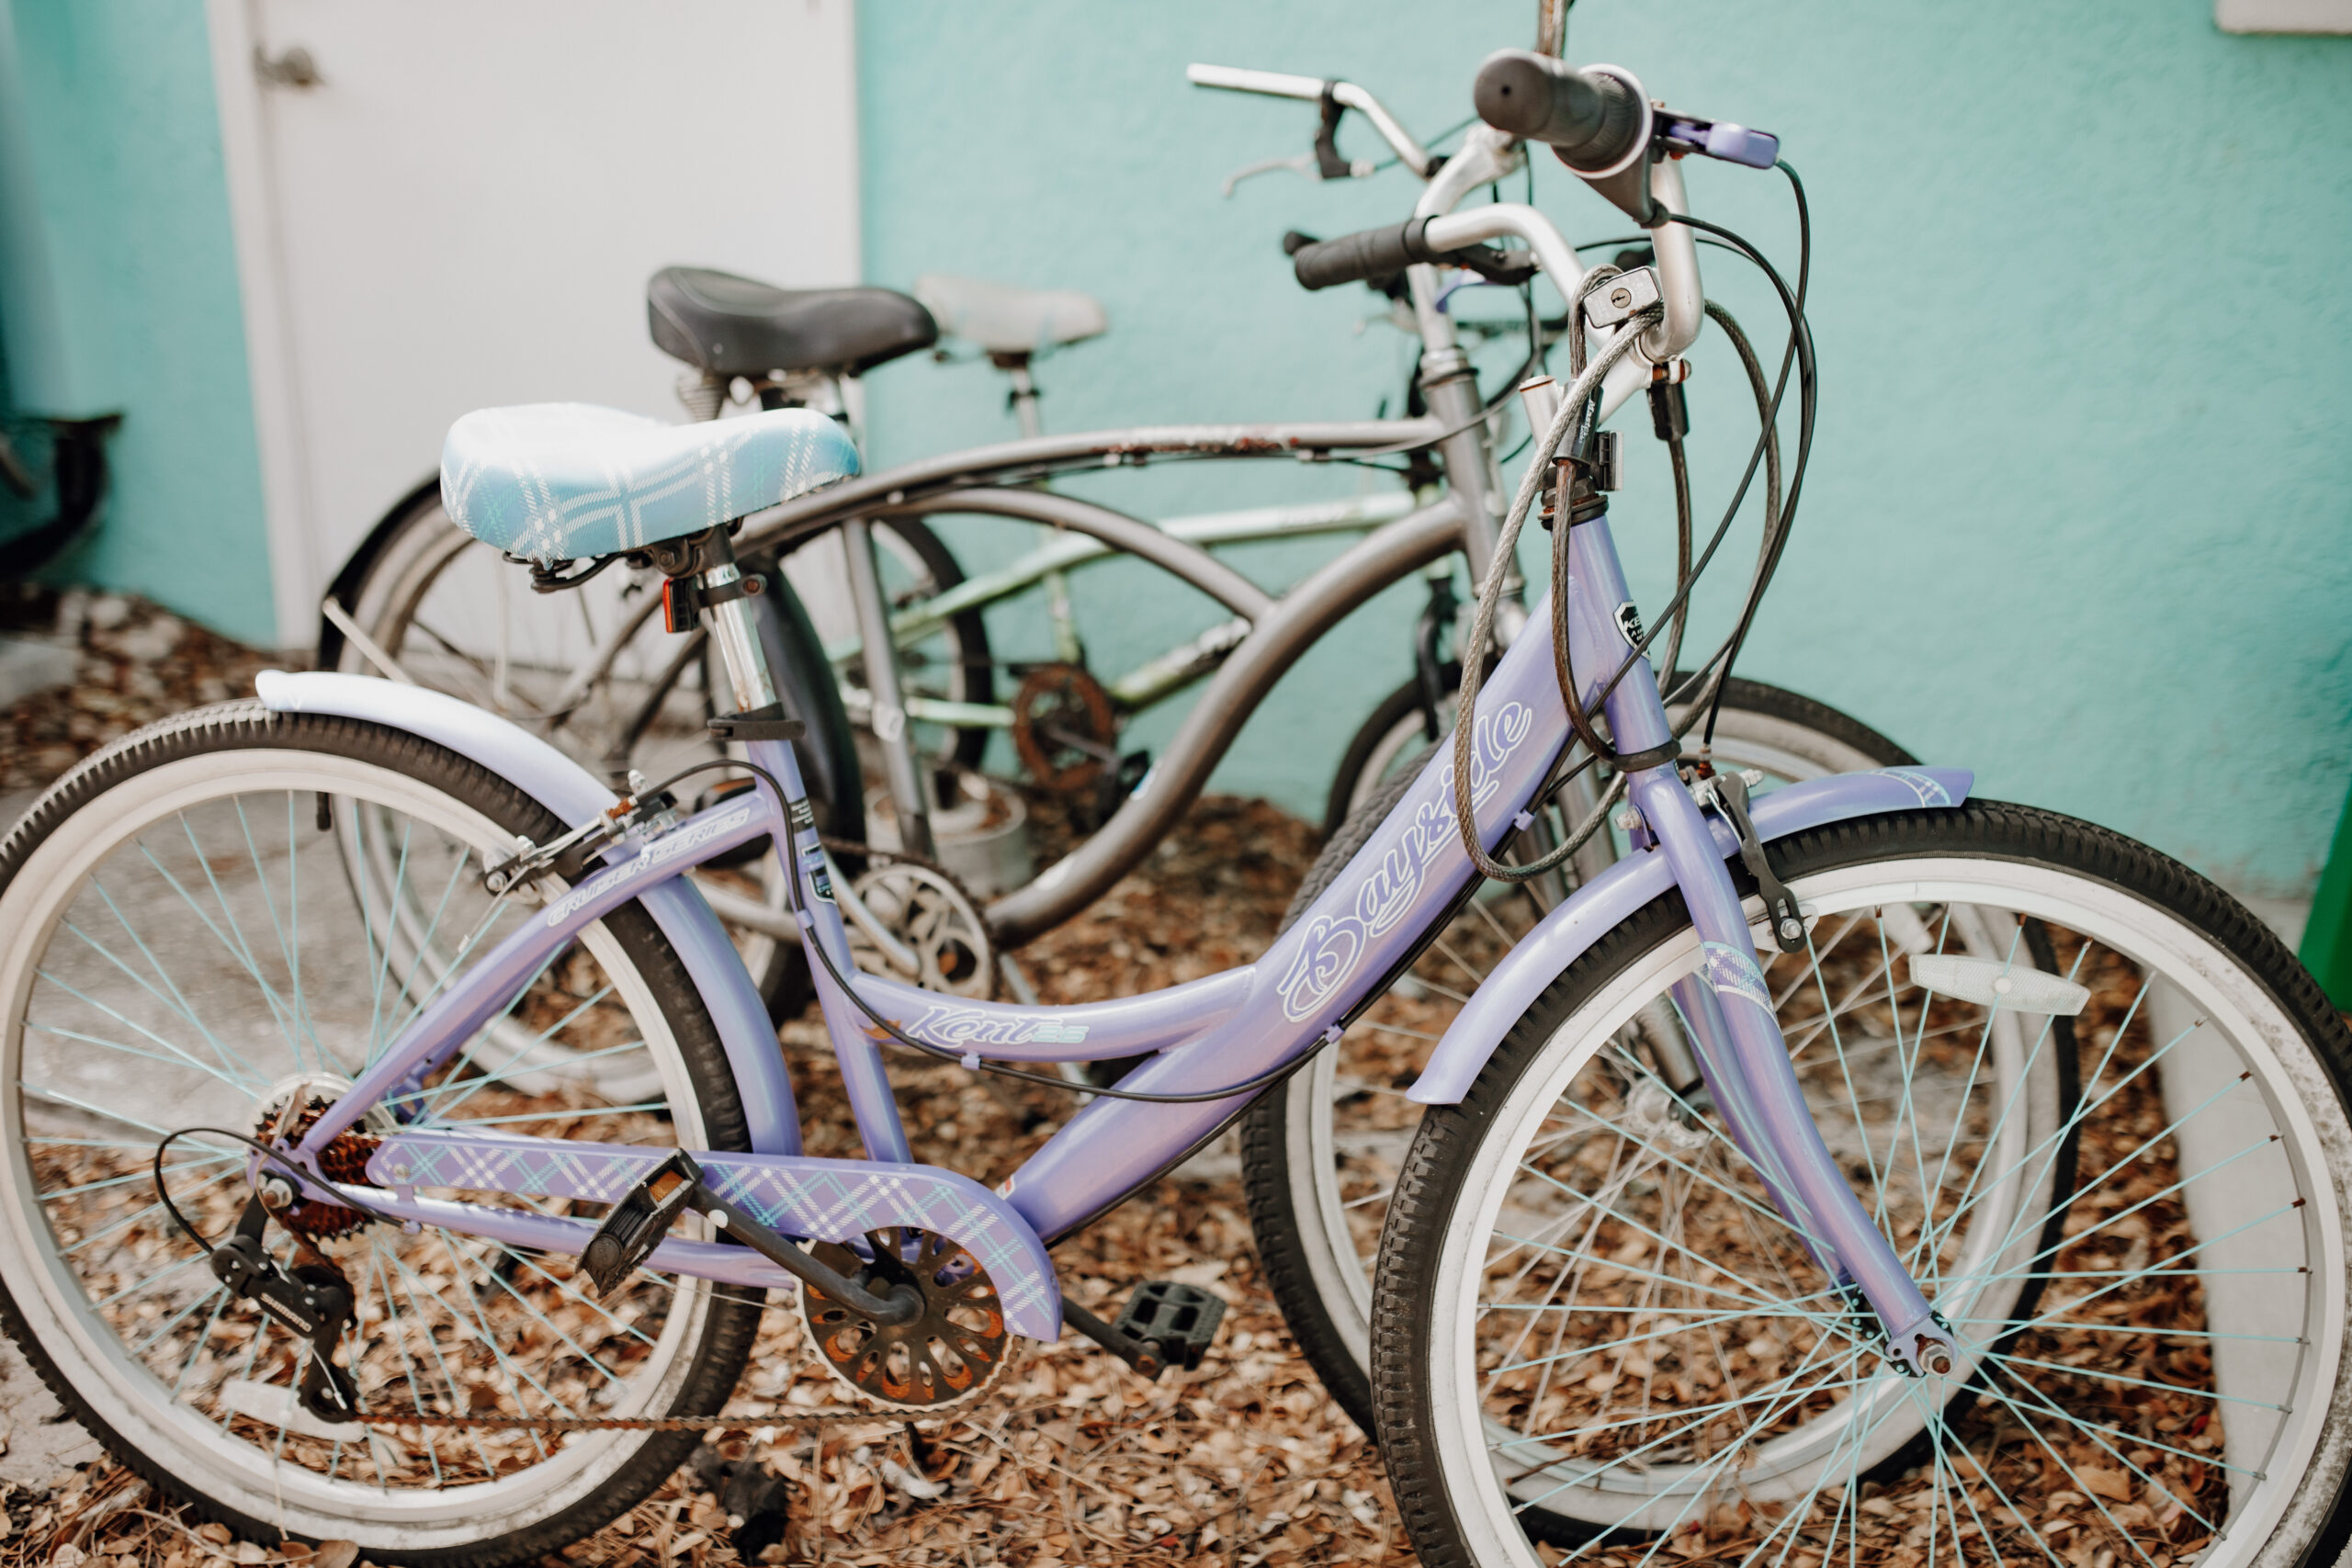 Bicycles for the women female residents of FRESH LIFE RECOVERY HOMES for sober living to use to get exercise and to get to their workplace.